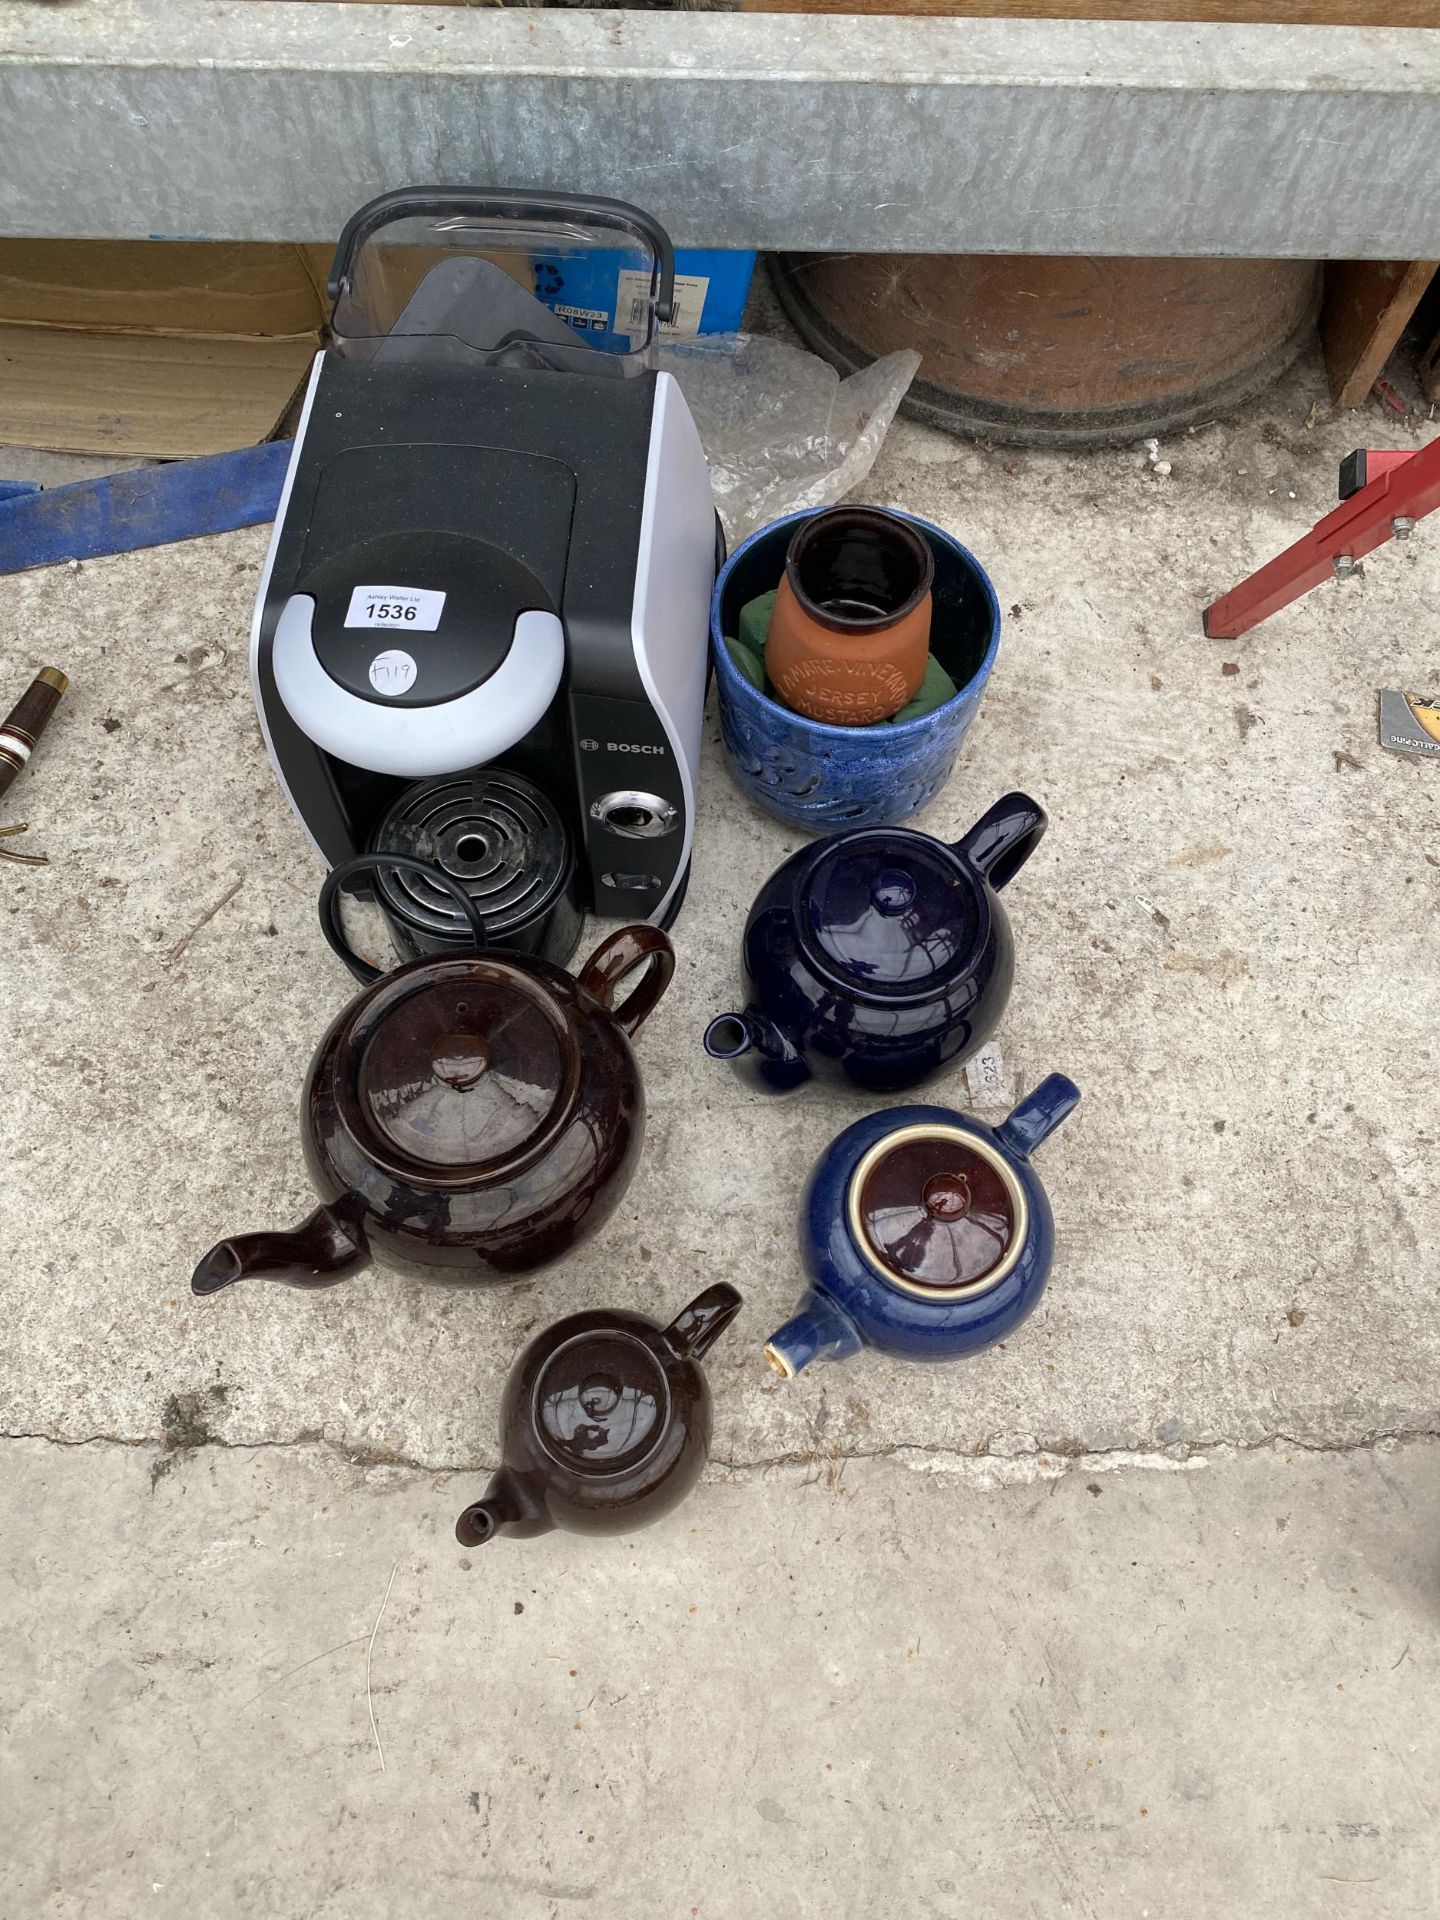 A COFFEE MAKER AND VARIOUS TEAPOTS